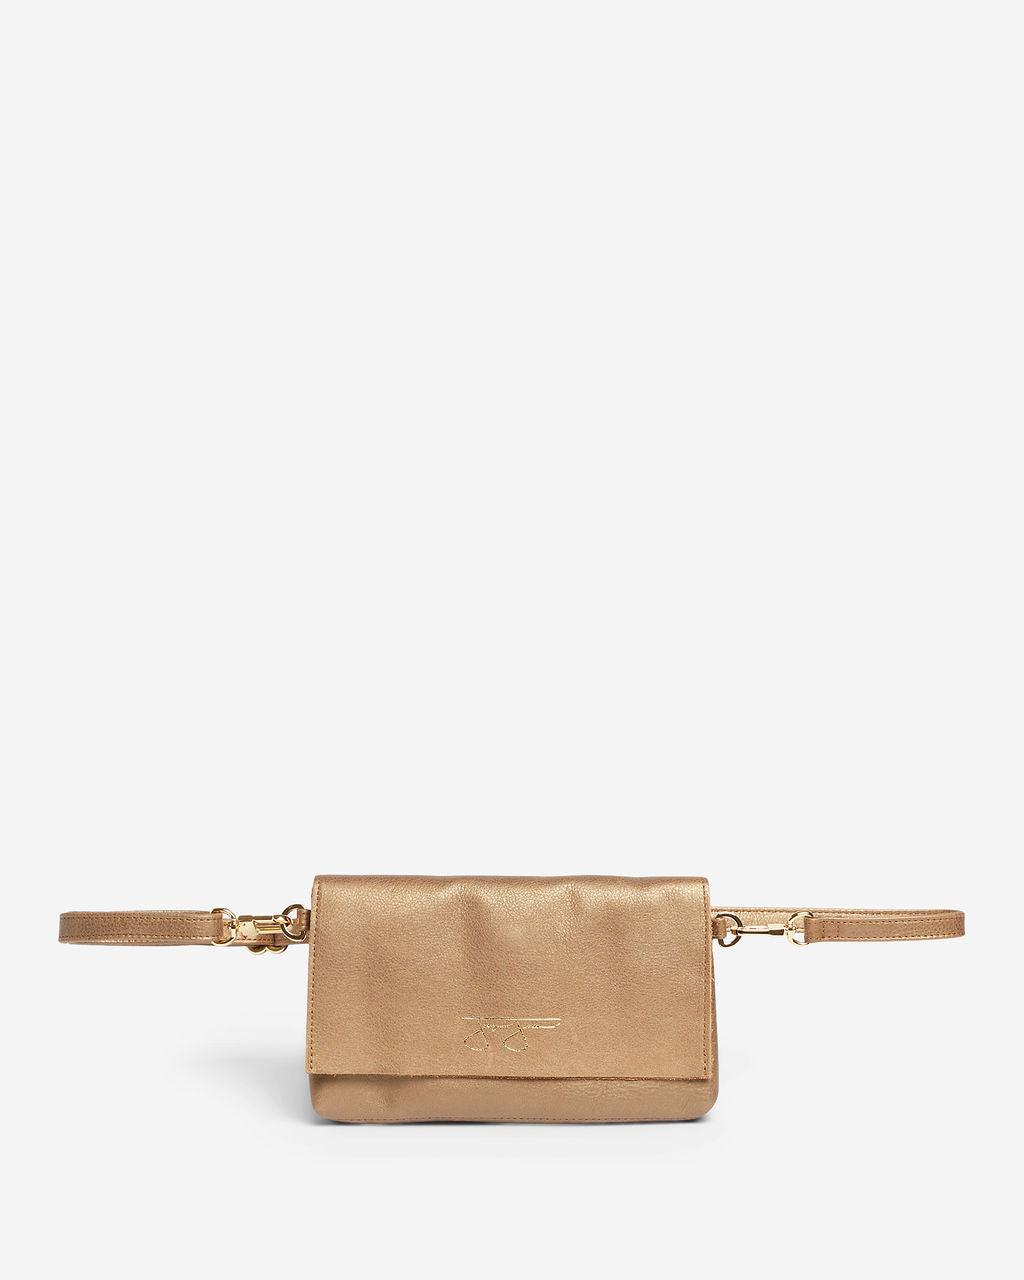 Norma Hipster Bag - Gold  Joey James, The Label   